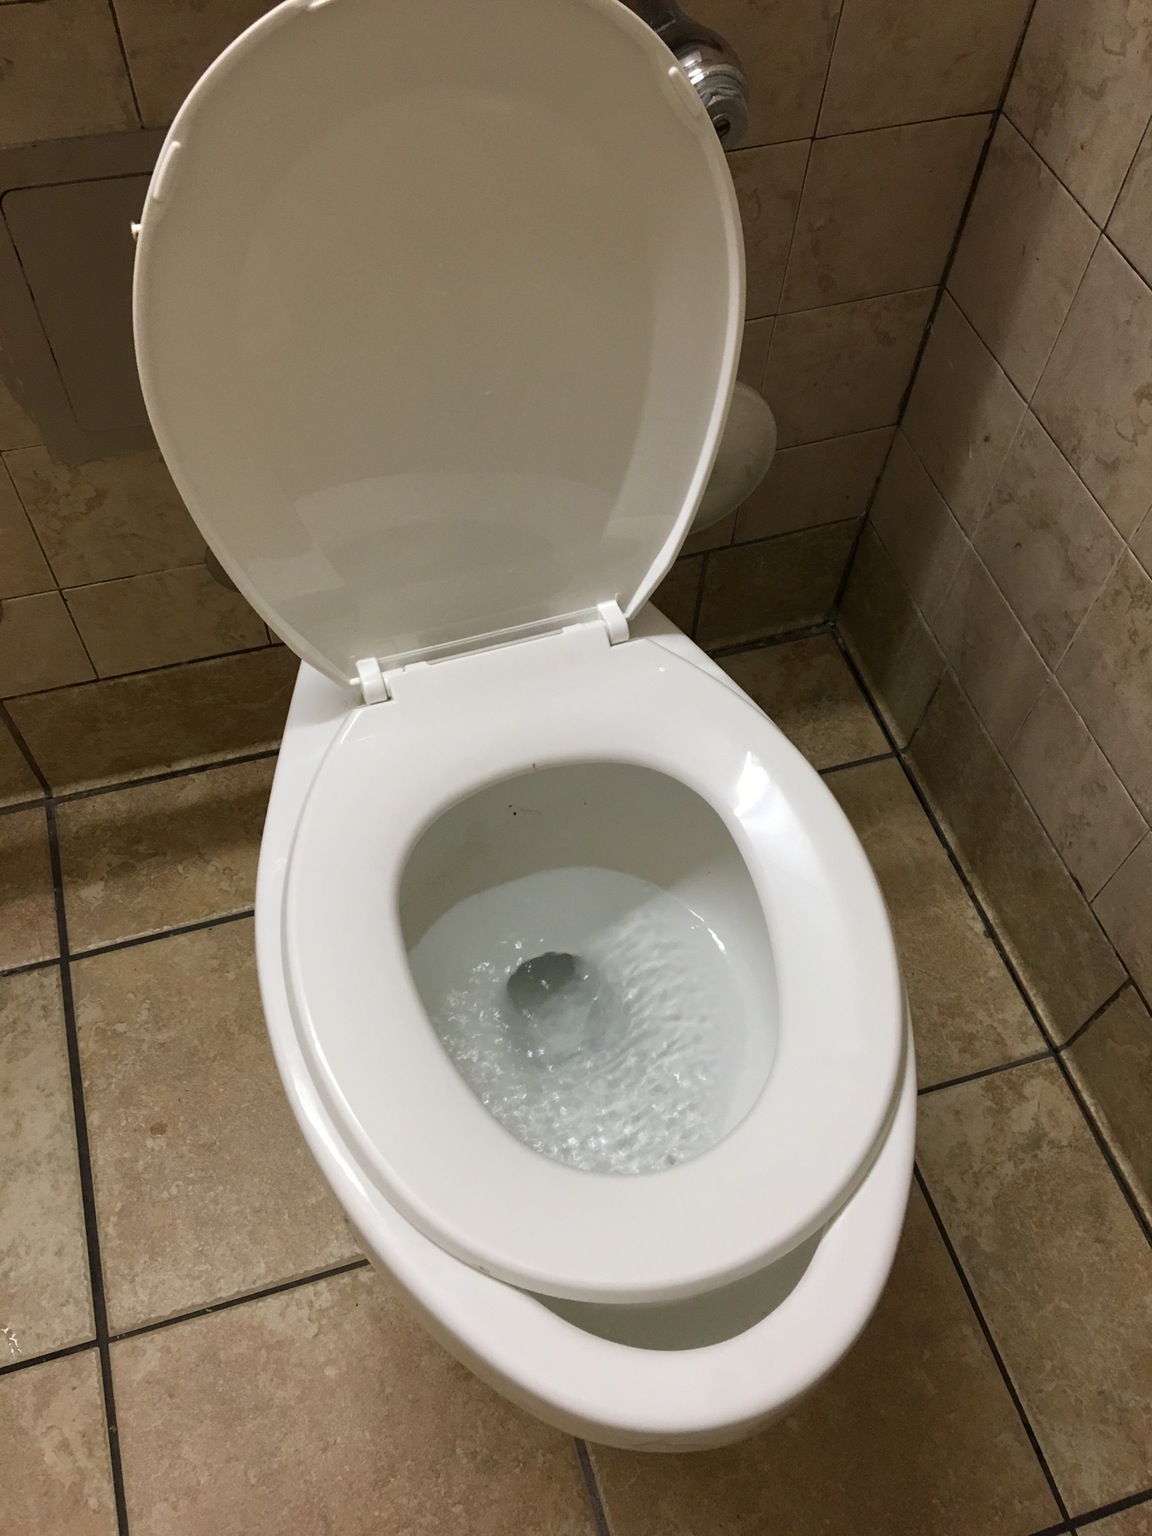 Toilet seat cover that is slightly too small